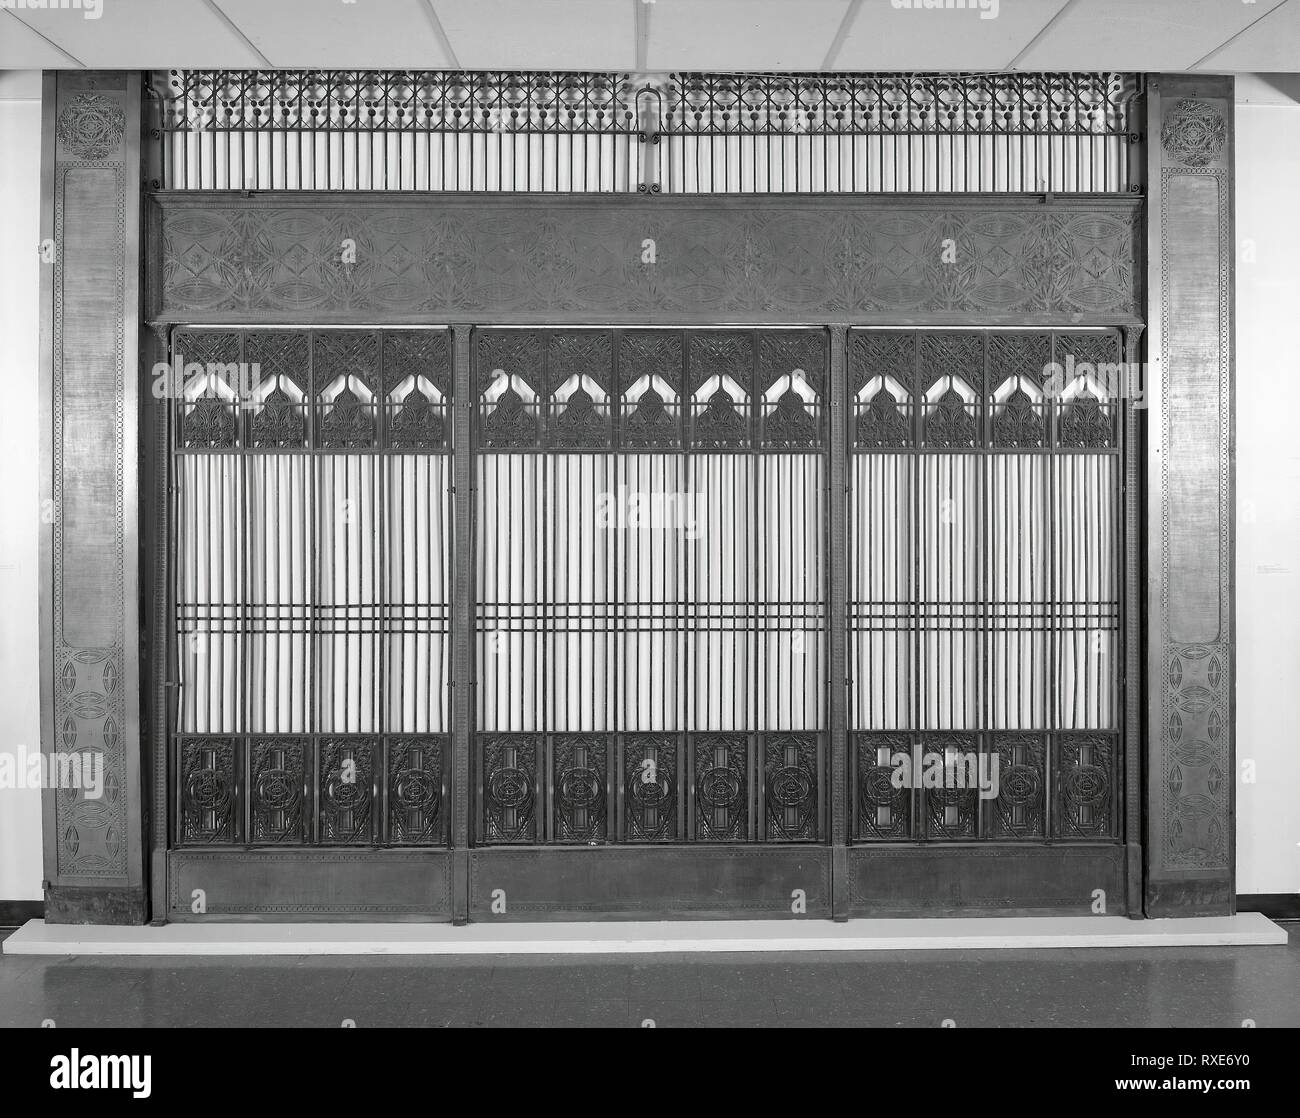 Chicago Stock Exchange: Bank of Five Elevator Grilles with Four Plates. Louis H. Sullivan; American, 1856-1924. Date: 1894. Dimensions: a)1 grill: 73 7/8 × 50 3/8 in. (o.h. × o.w.)  b-c) 2 grilles: 45 3/4 × 84 in. (o.h. × o.w.)  d-e) 2 grilles: 70 1/4 × 18 in. (o.w. × o.l.)  f) plate: 18 × 140 1/4 in. (o.w. × o.l.)   g) plate: 10 1/4 × 51 3/4 in. (o.w. × o.l.)   h) plate: 119 3/4 × 13 in.   i) plate: 119 3/4 × 14 in. Cast iron, wrought iron, and copper-plated cast iron. Origin: United States. Museum: The Chicago Art Institute. Author: Louis H. Sullivan. Architects Adler & Sullivan. Stock Photo